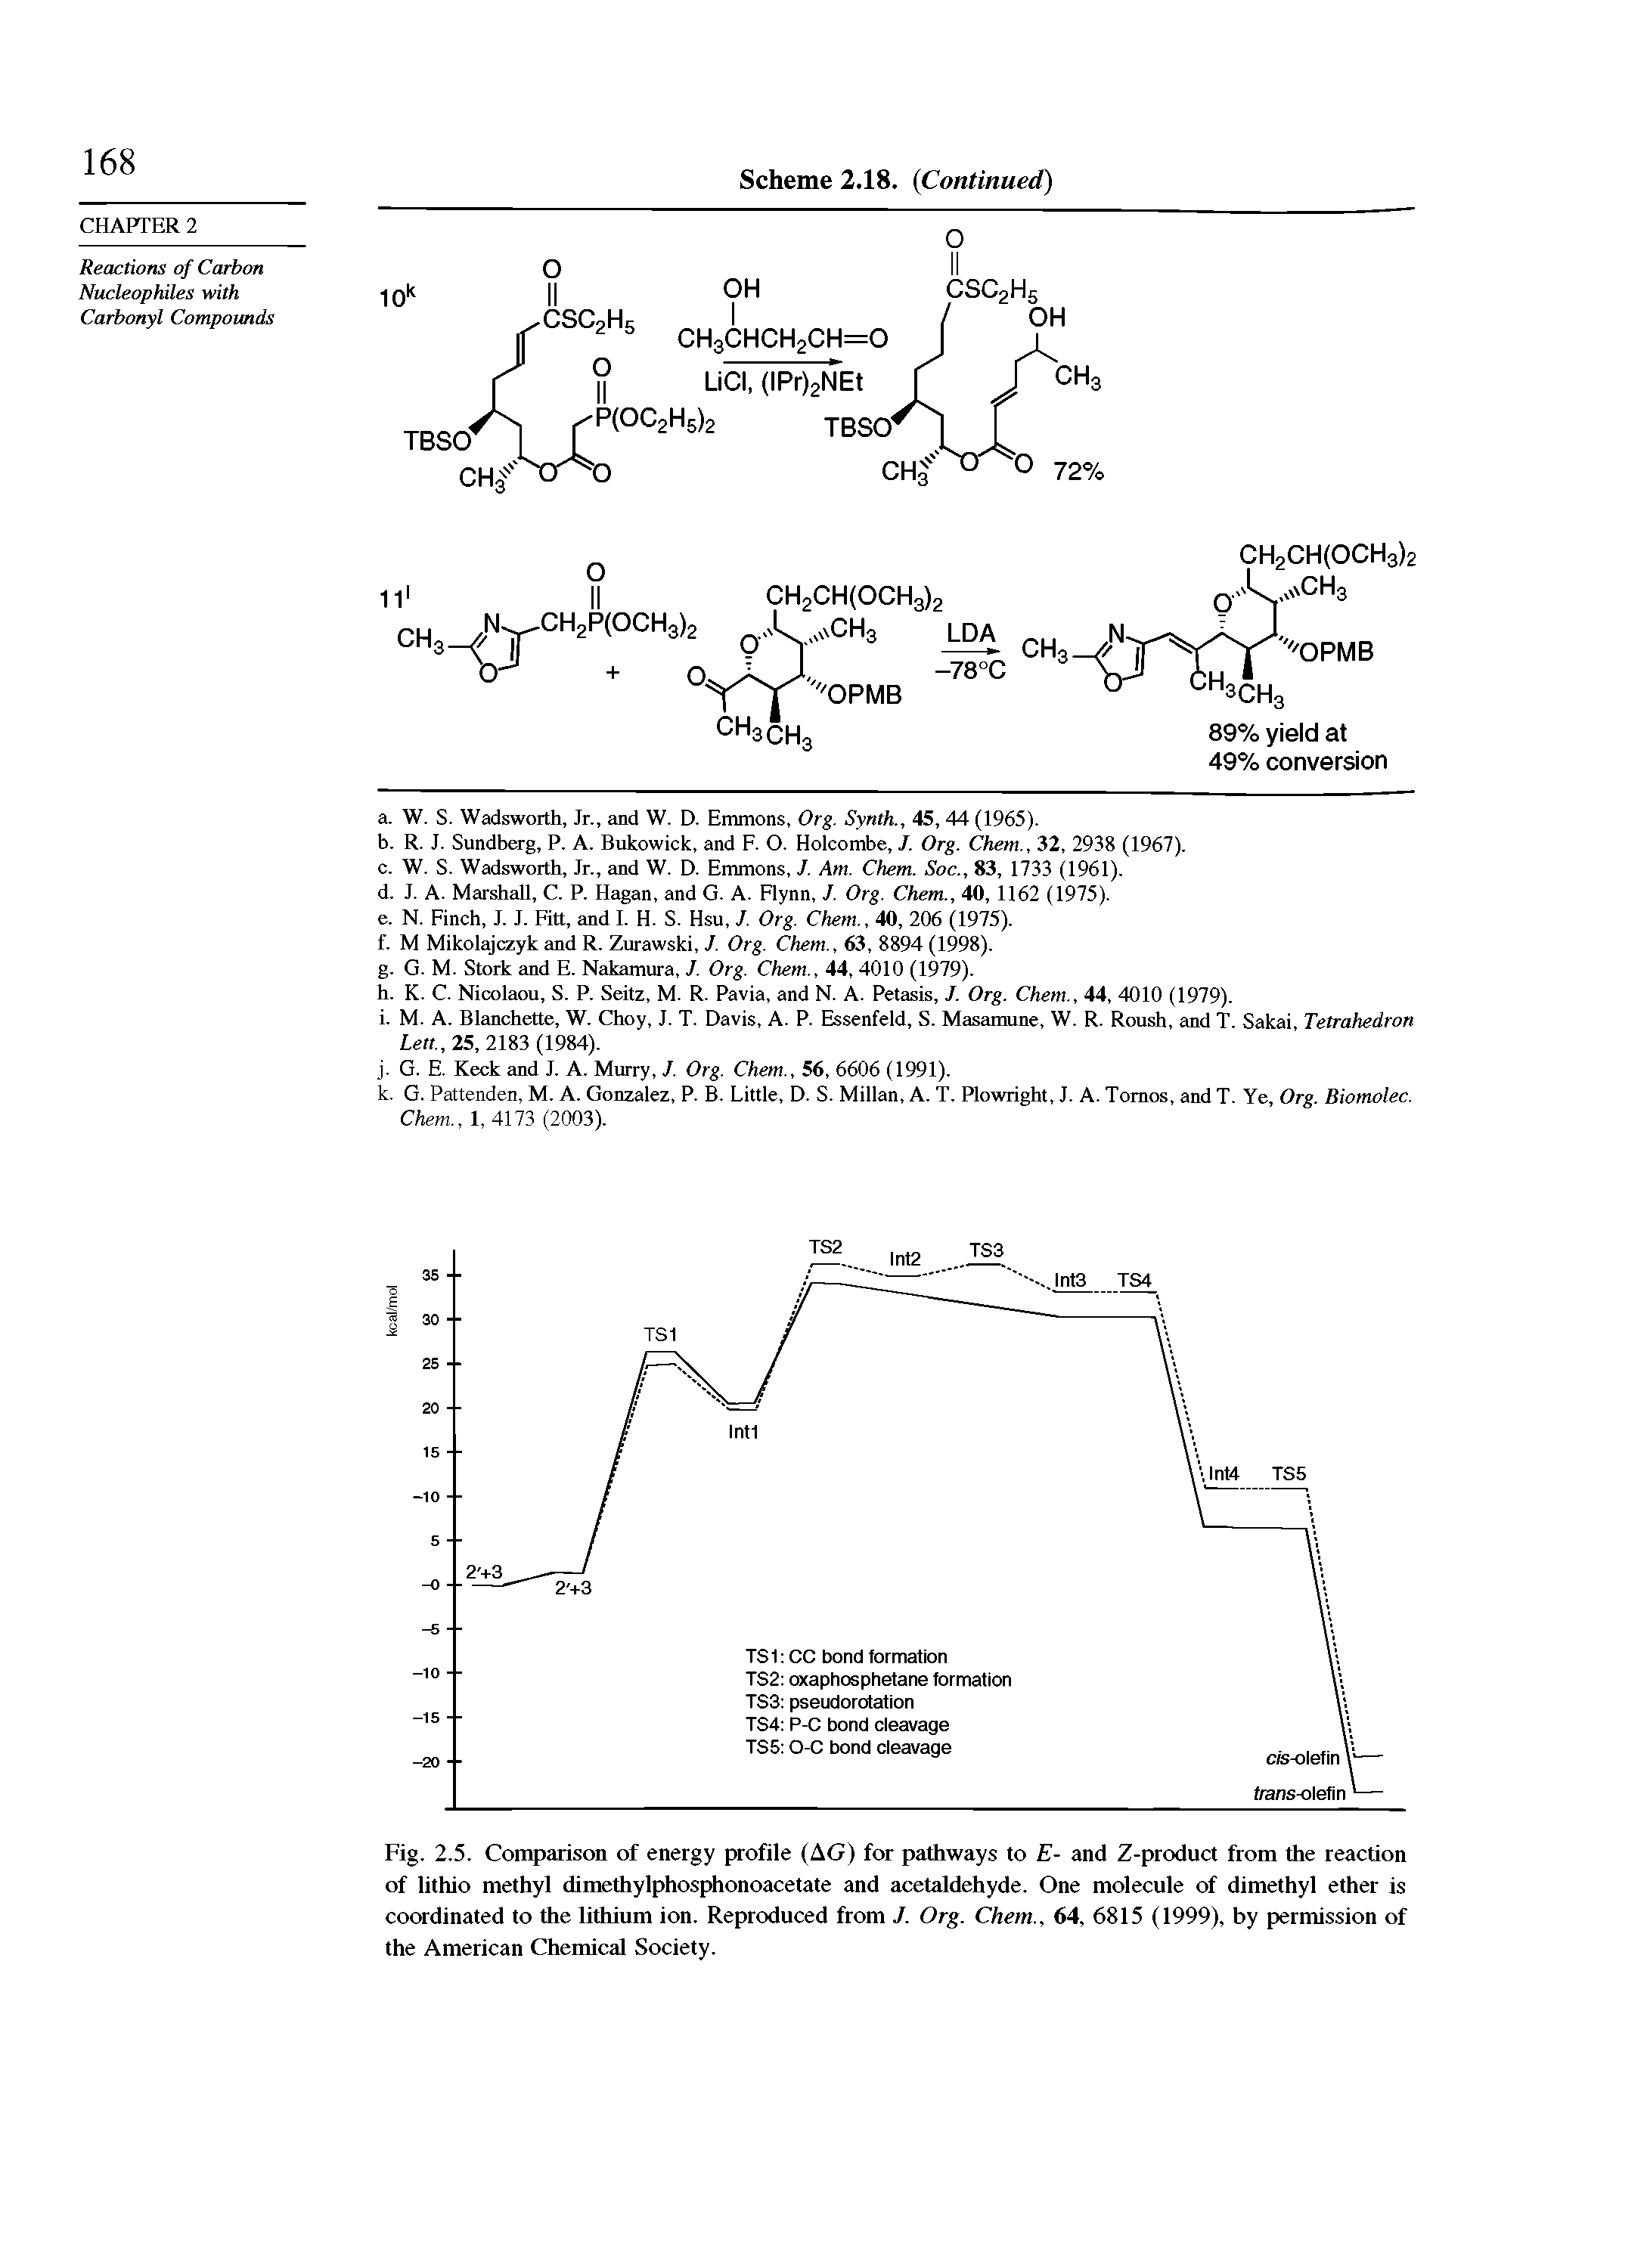 Fig. 2.5. Comparison of energy profile (AG) for pathways to E- and Z-product from the reaction of lithio methyl dimethylphosphonoacetate and acetaldehyde. One molecule of dimethyl ether is coordinated to the lithium ion. Reproduced from J. Org. Chem., 64, 6815 (1999), by permission of the American Chemical Society.